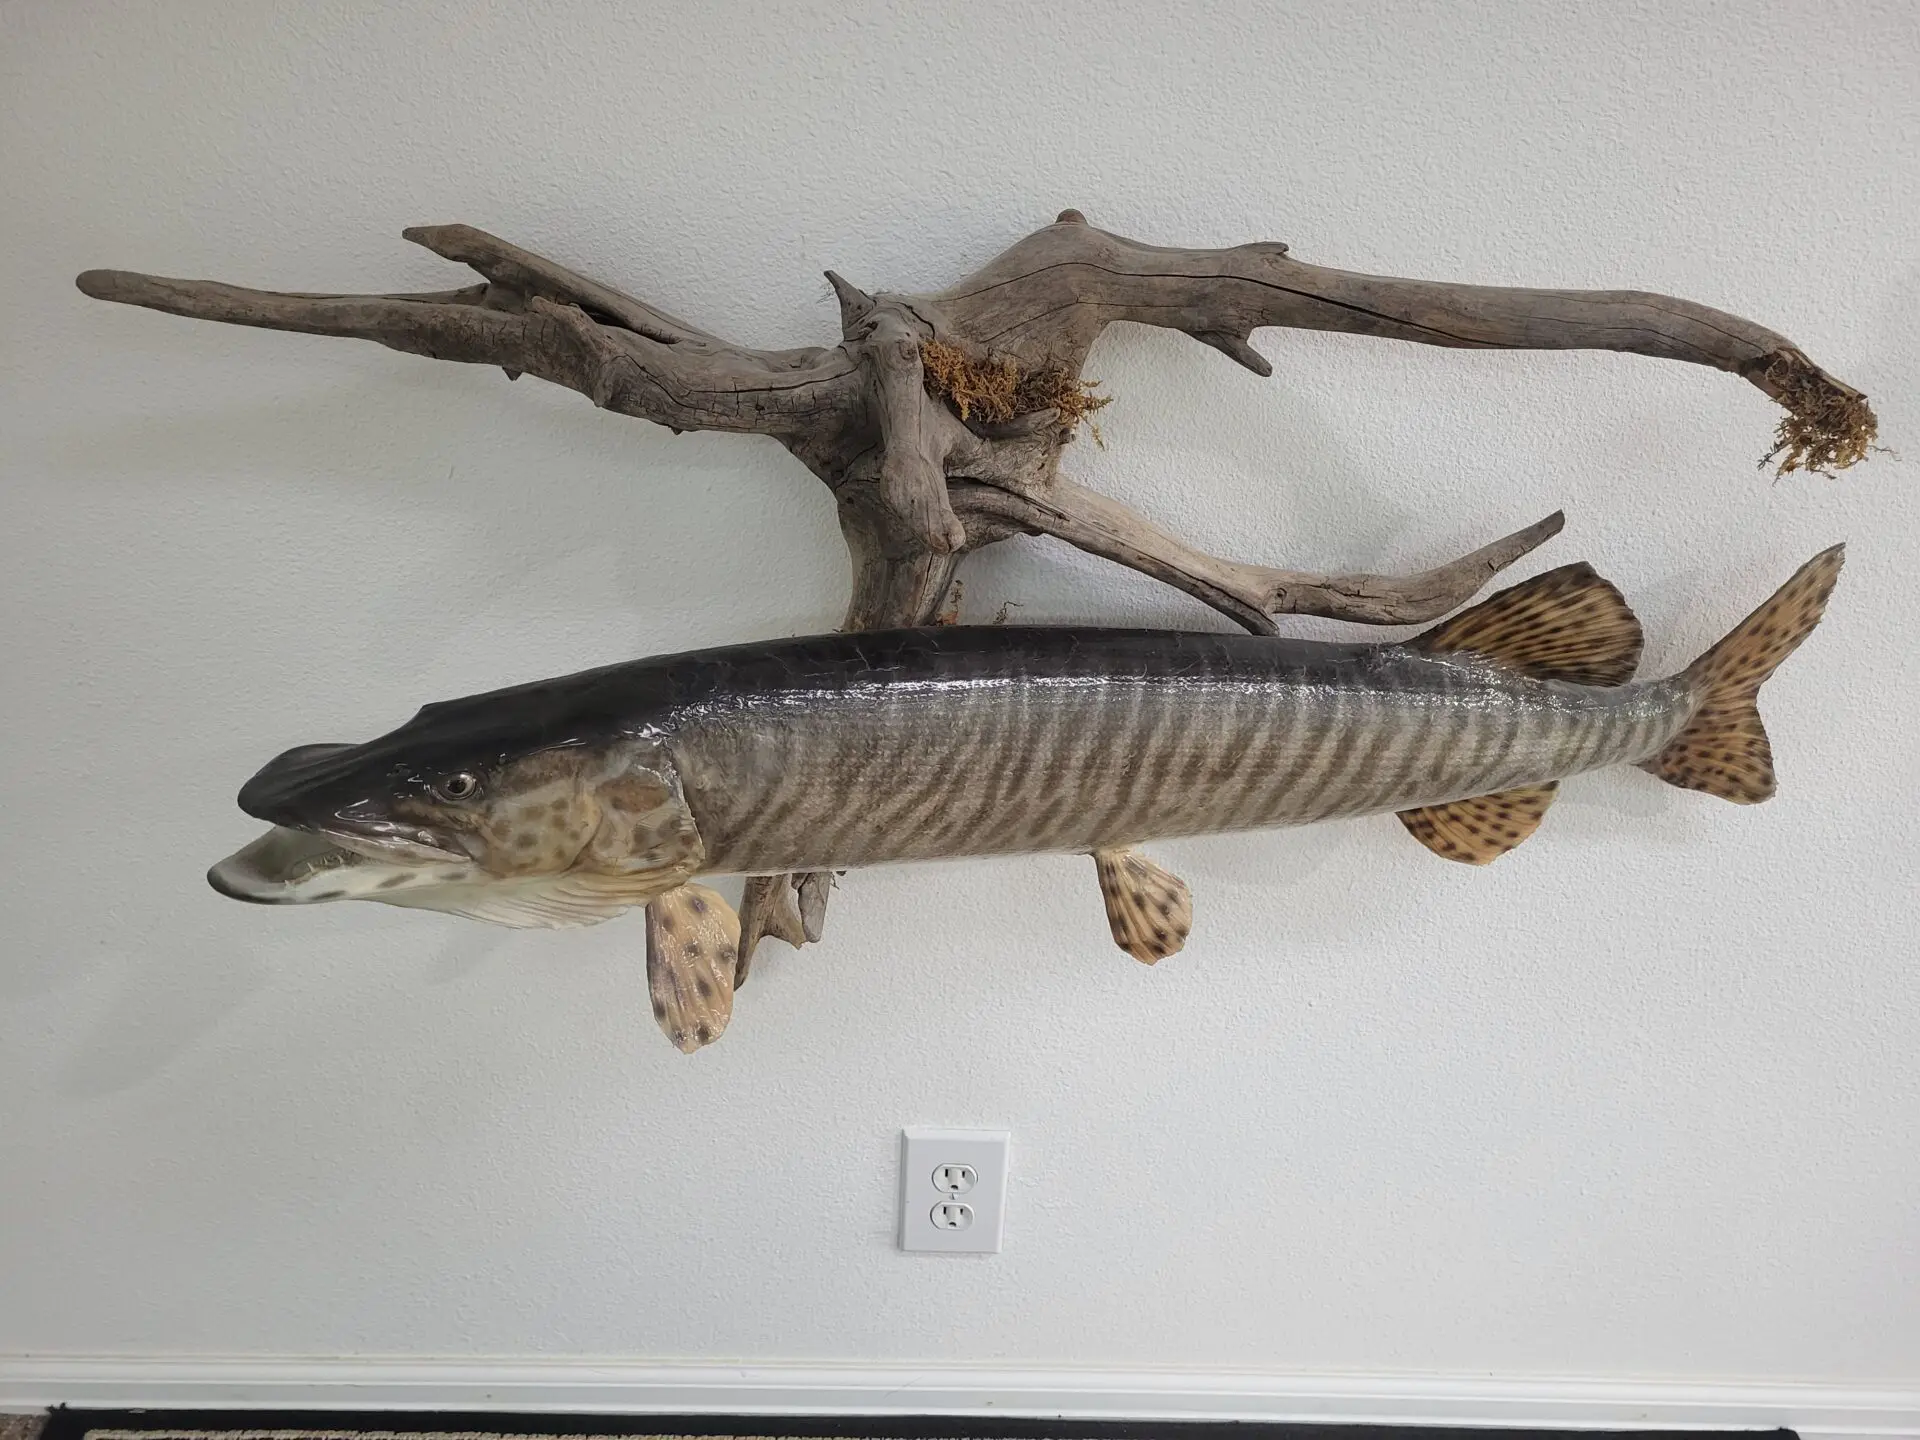 A long length fish taxidermy on display at the gallery